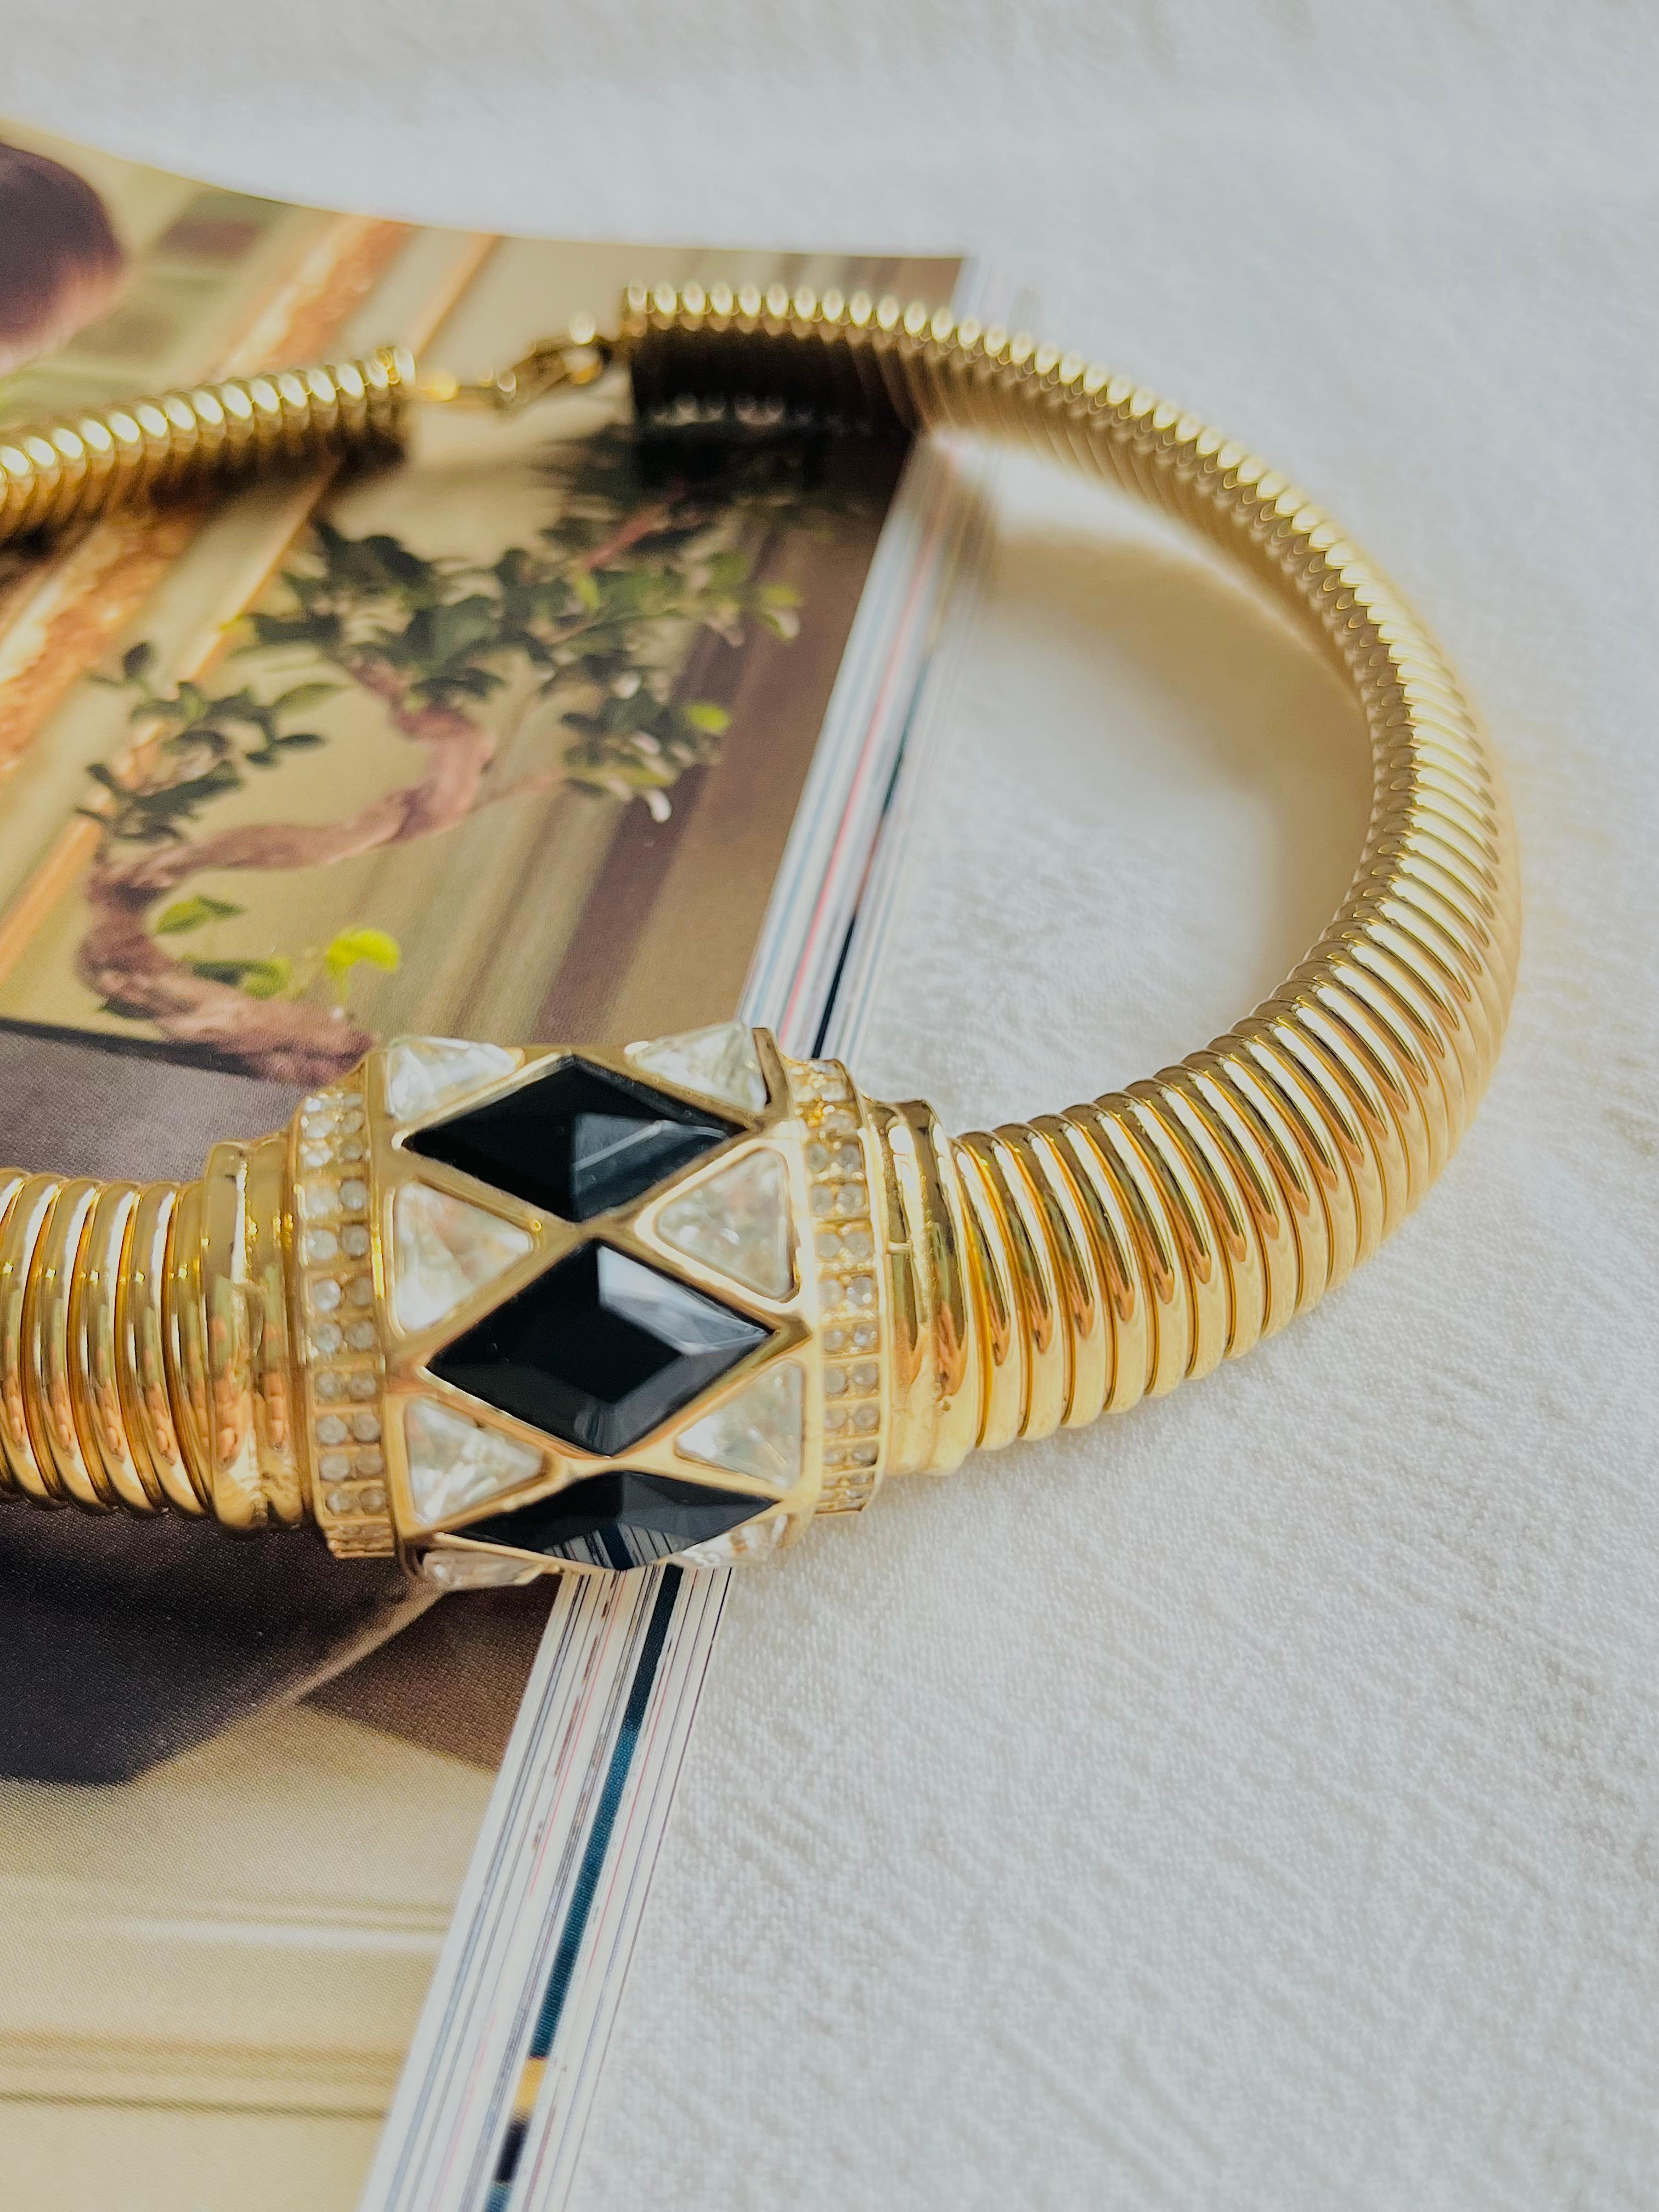 Christian Dior Vintage 1970s Black Diamonds Crystals Pendant Ribbed Omega Chunky Choker Necklace, Gold Plated

Very good condition. Marked 'Chr.Dior (C) '. 100% Genuine.

Light scratches or color loss, barely noticeable.

It is over 50 years old.